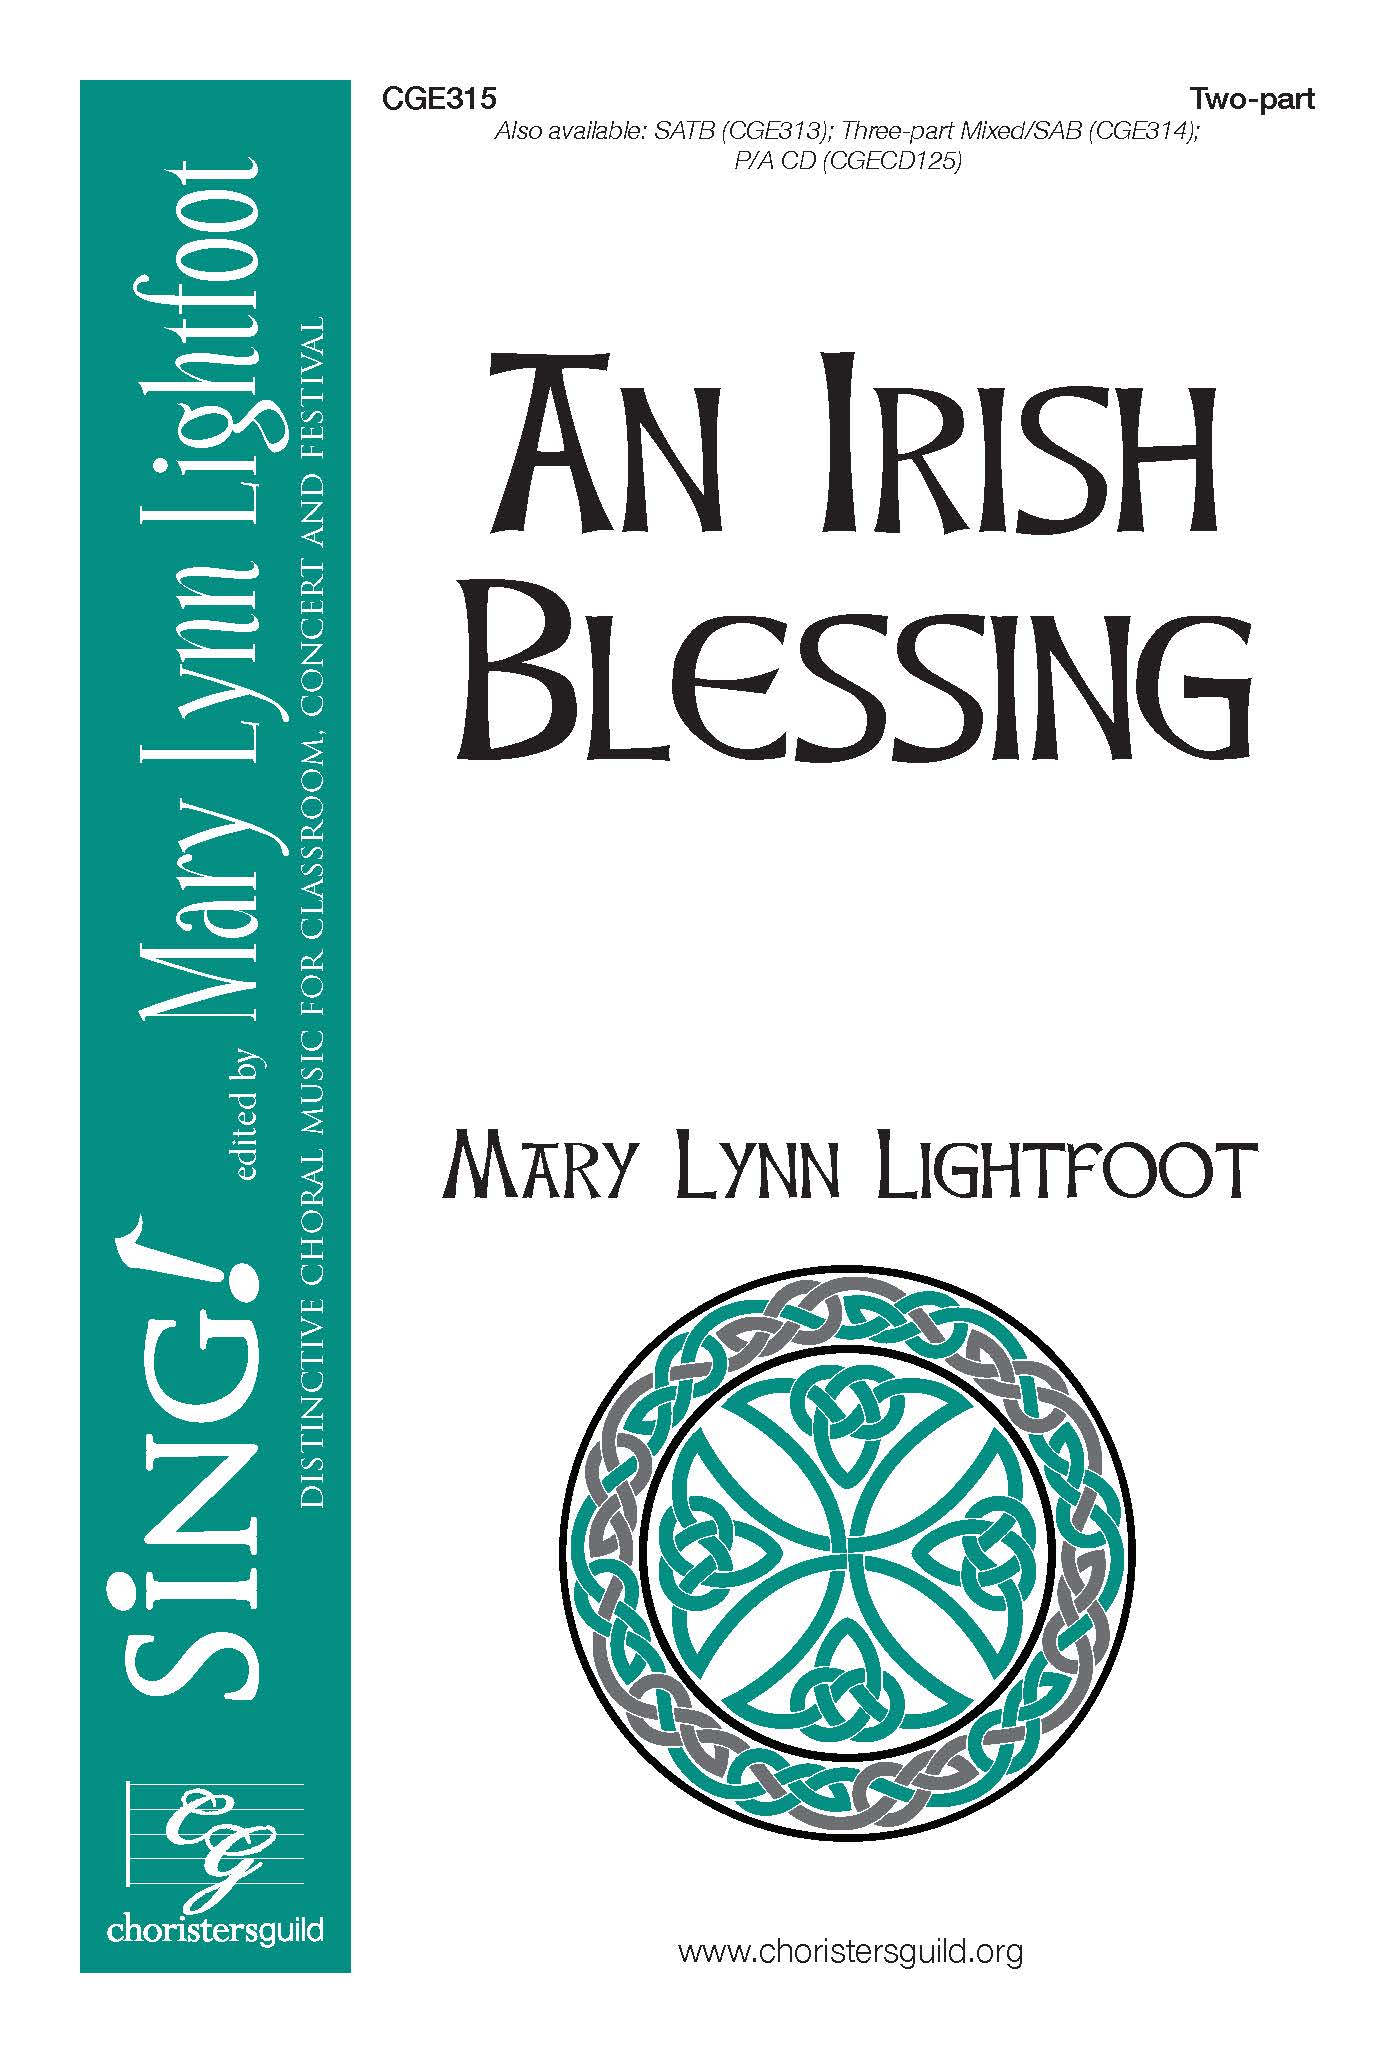 An Irish Blessing - Two-part